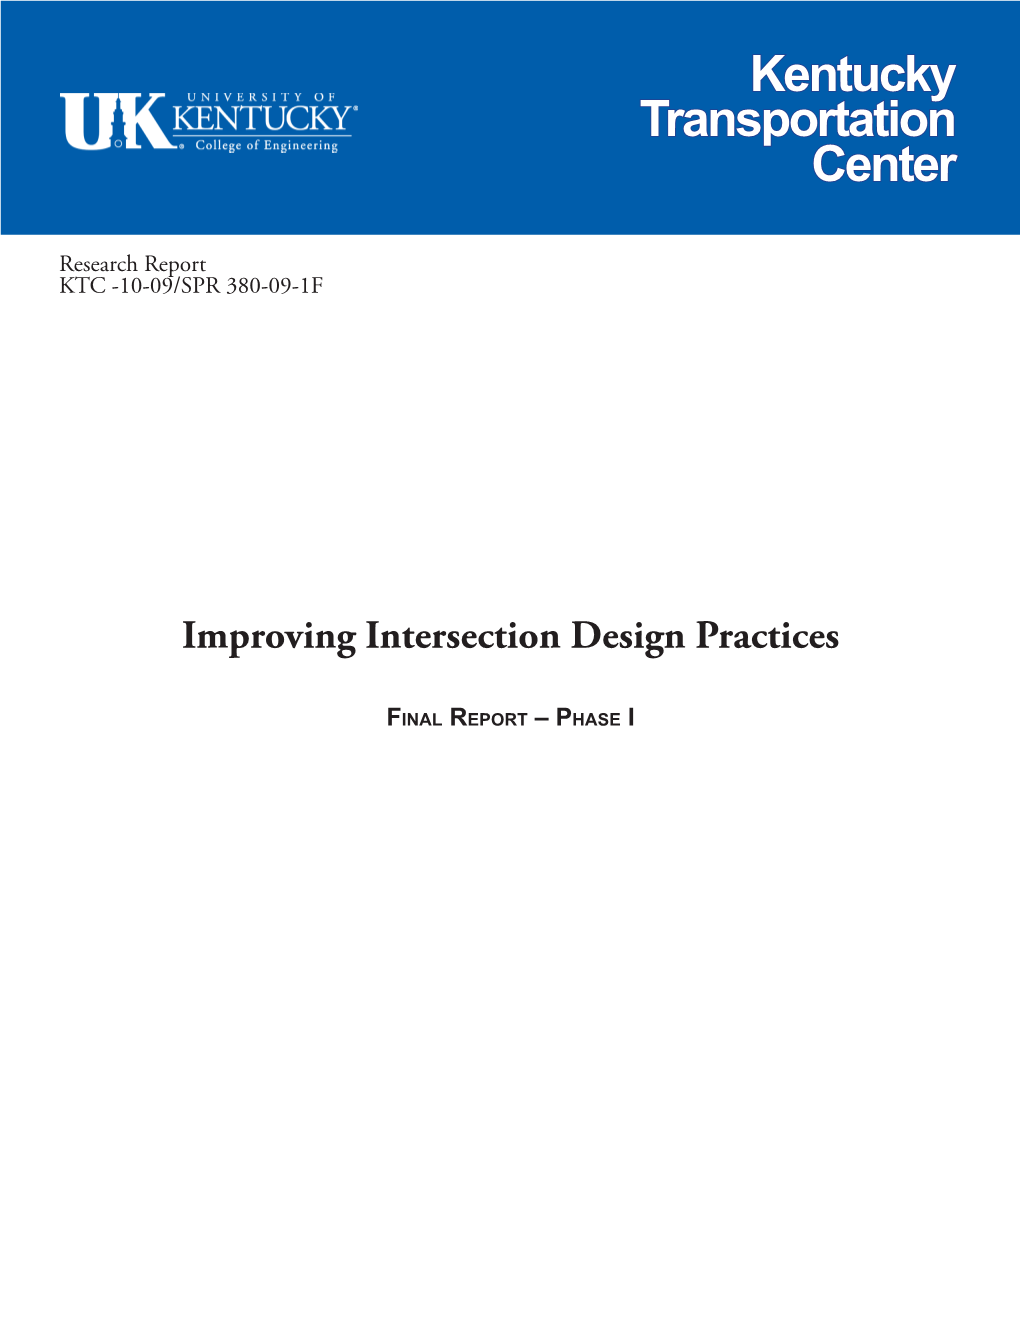 Improving Intersection Design Practices -- Final